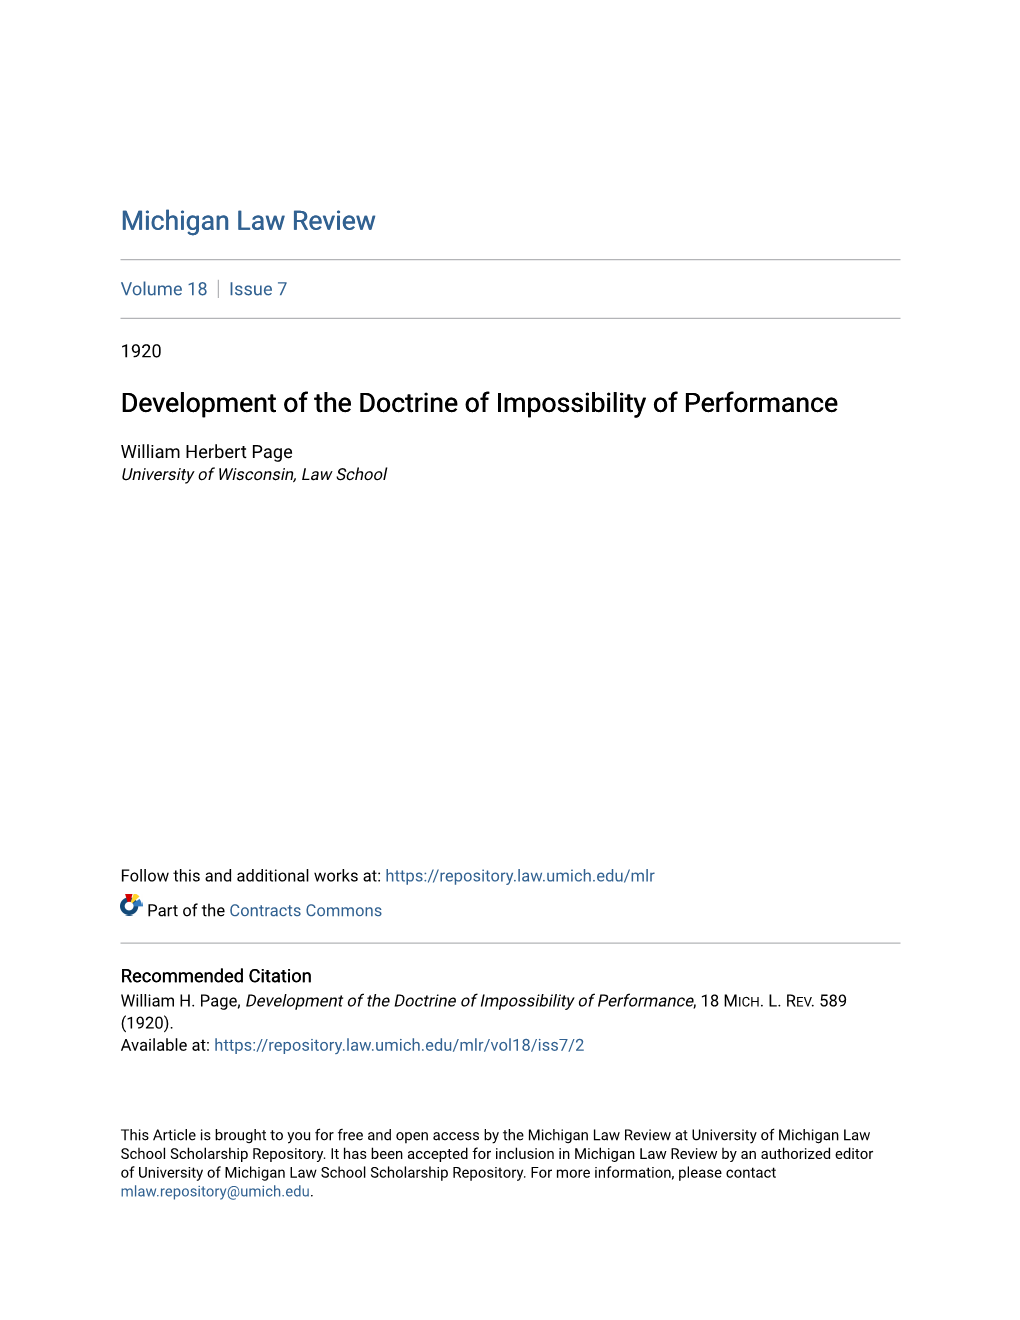 Development of the Doctrine of Impossibility of Performance